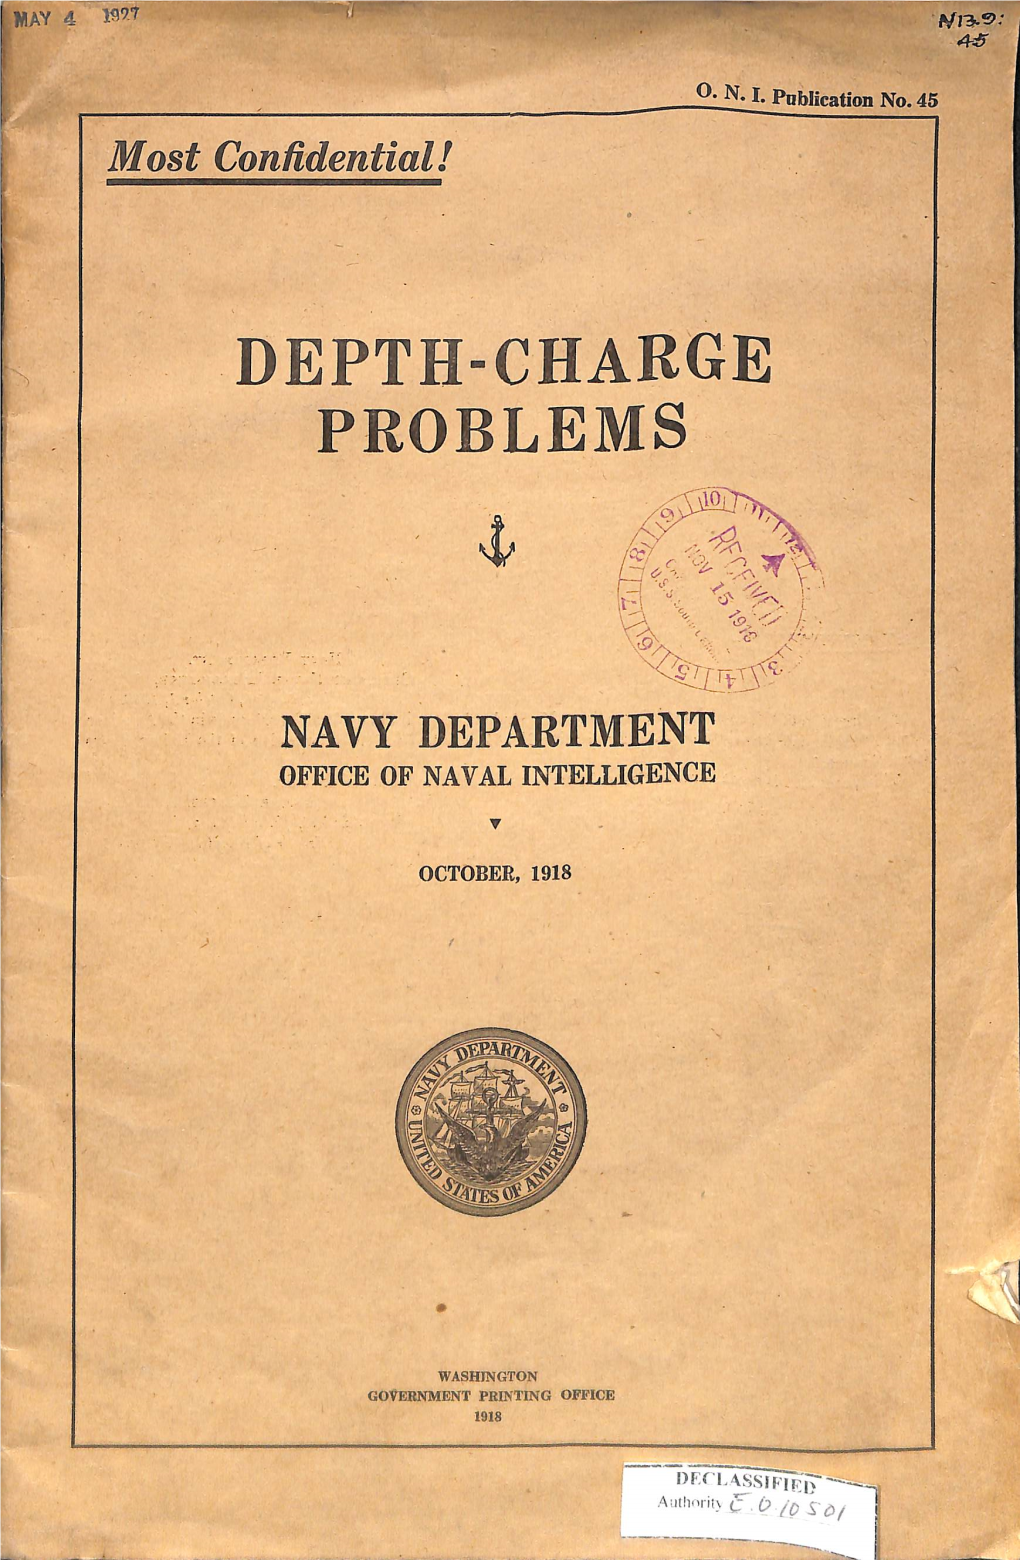 No. 45 Depth-Charge Problems October 1918